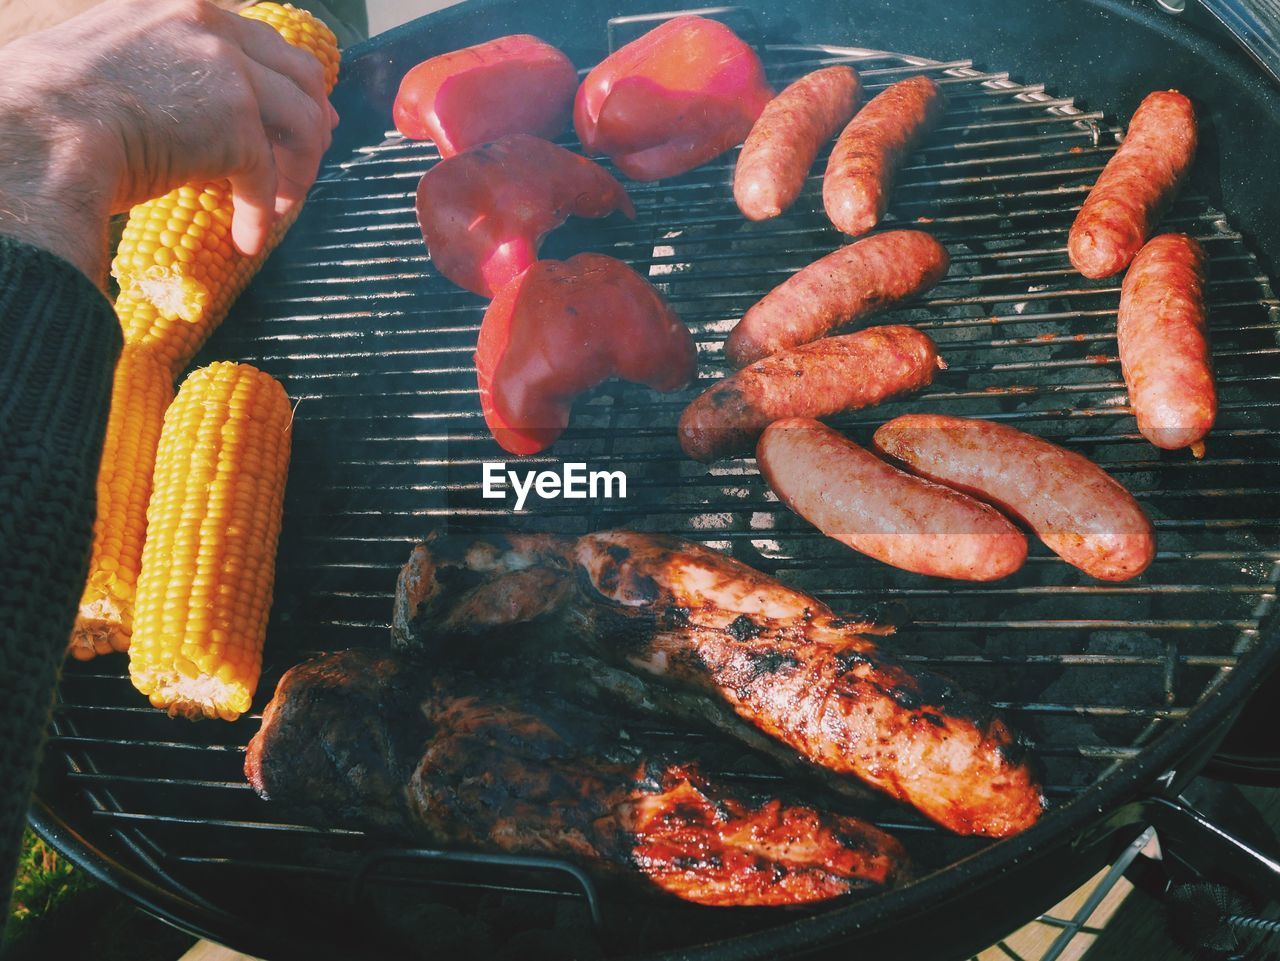 Cropped hand grilling food on barbecue